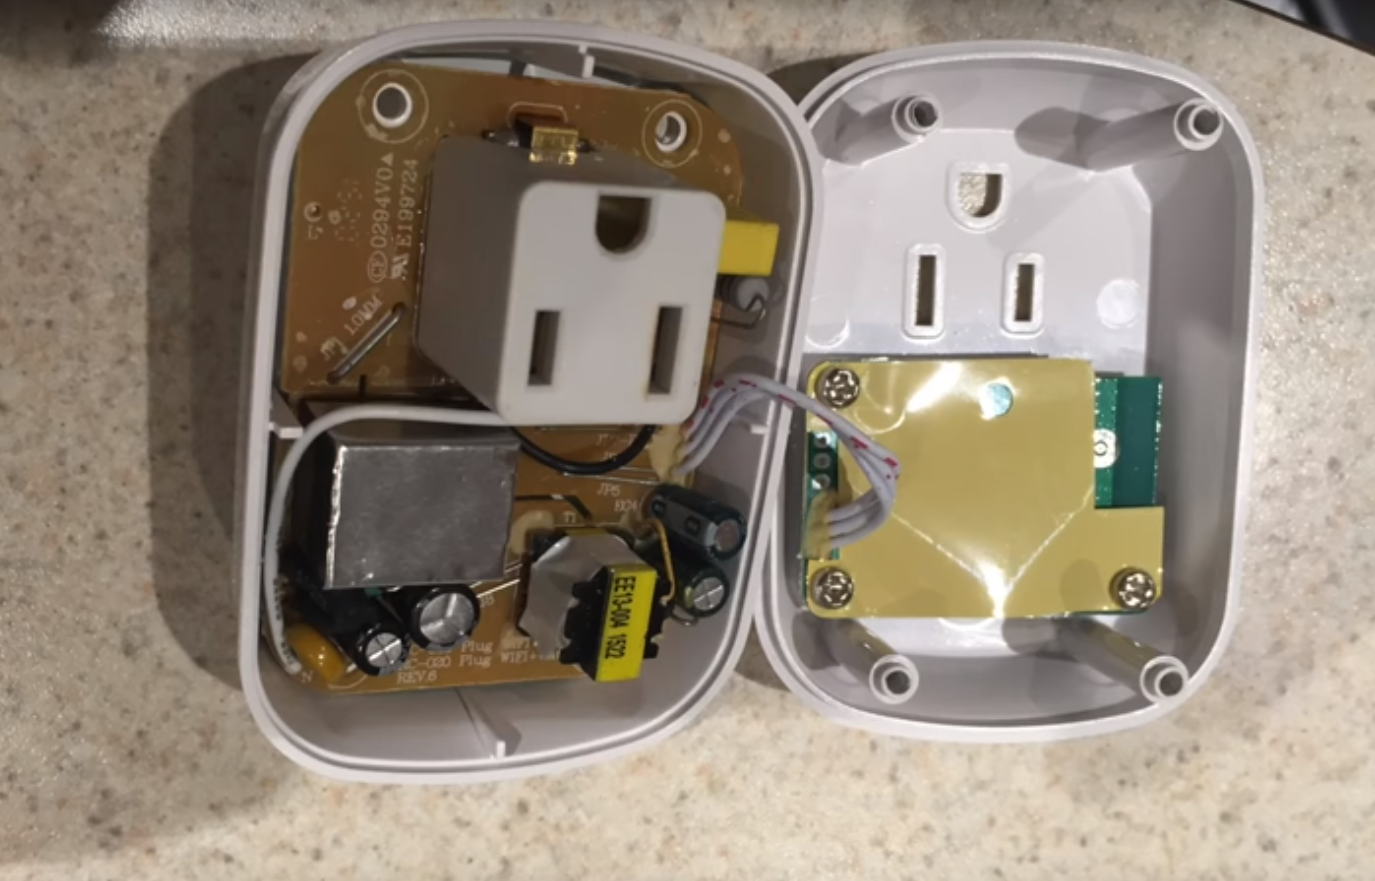 https://hackaday.com/wp-content/uploads/2016/02/wifi-outlet.png